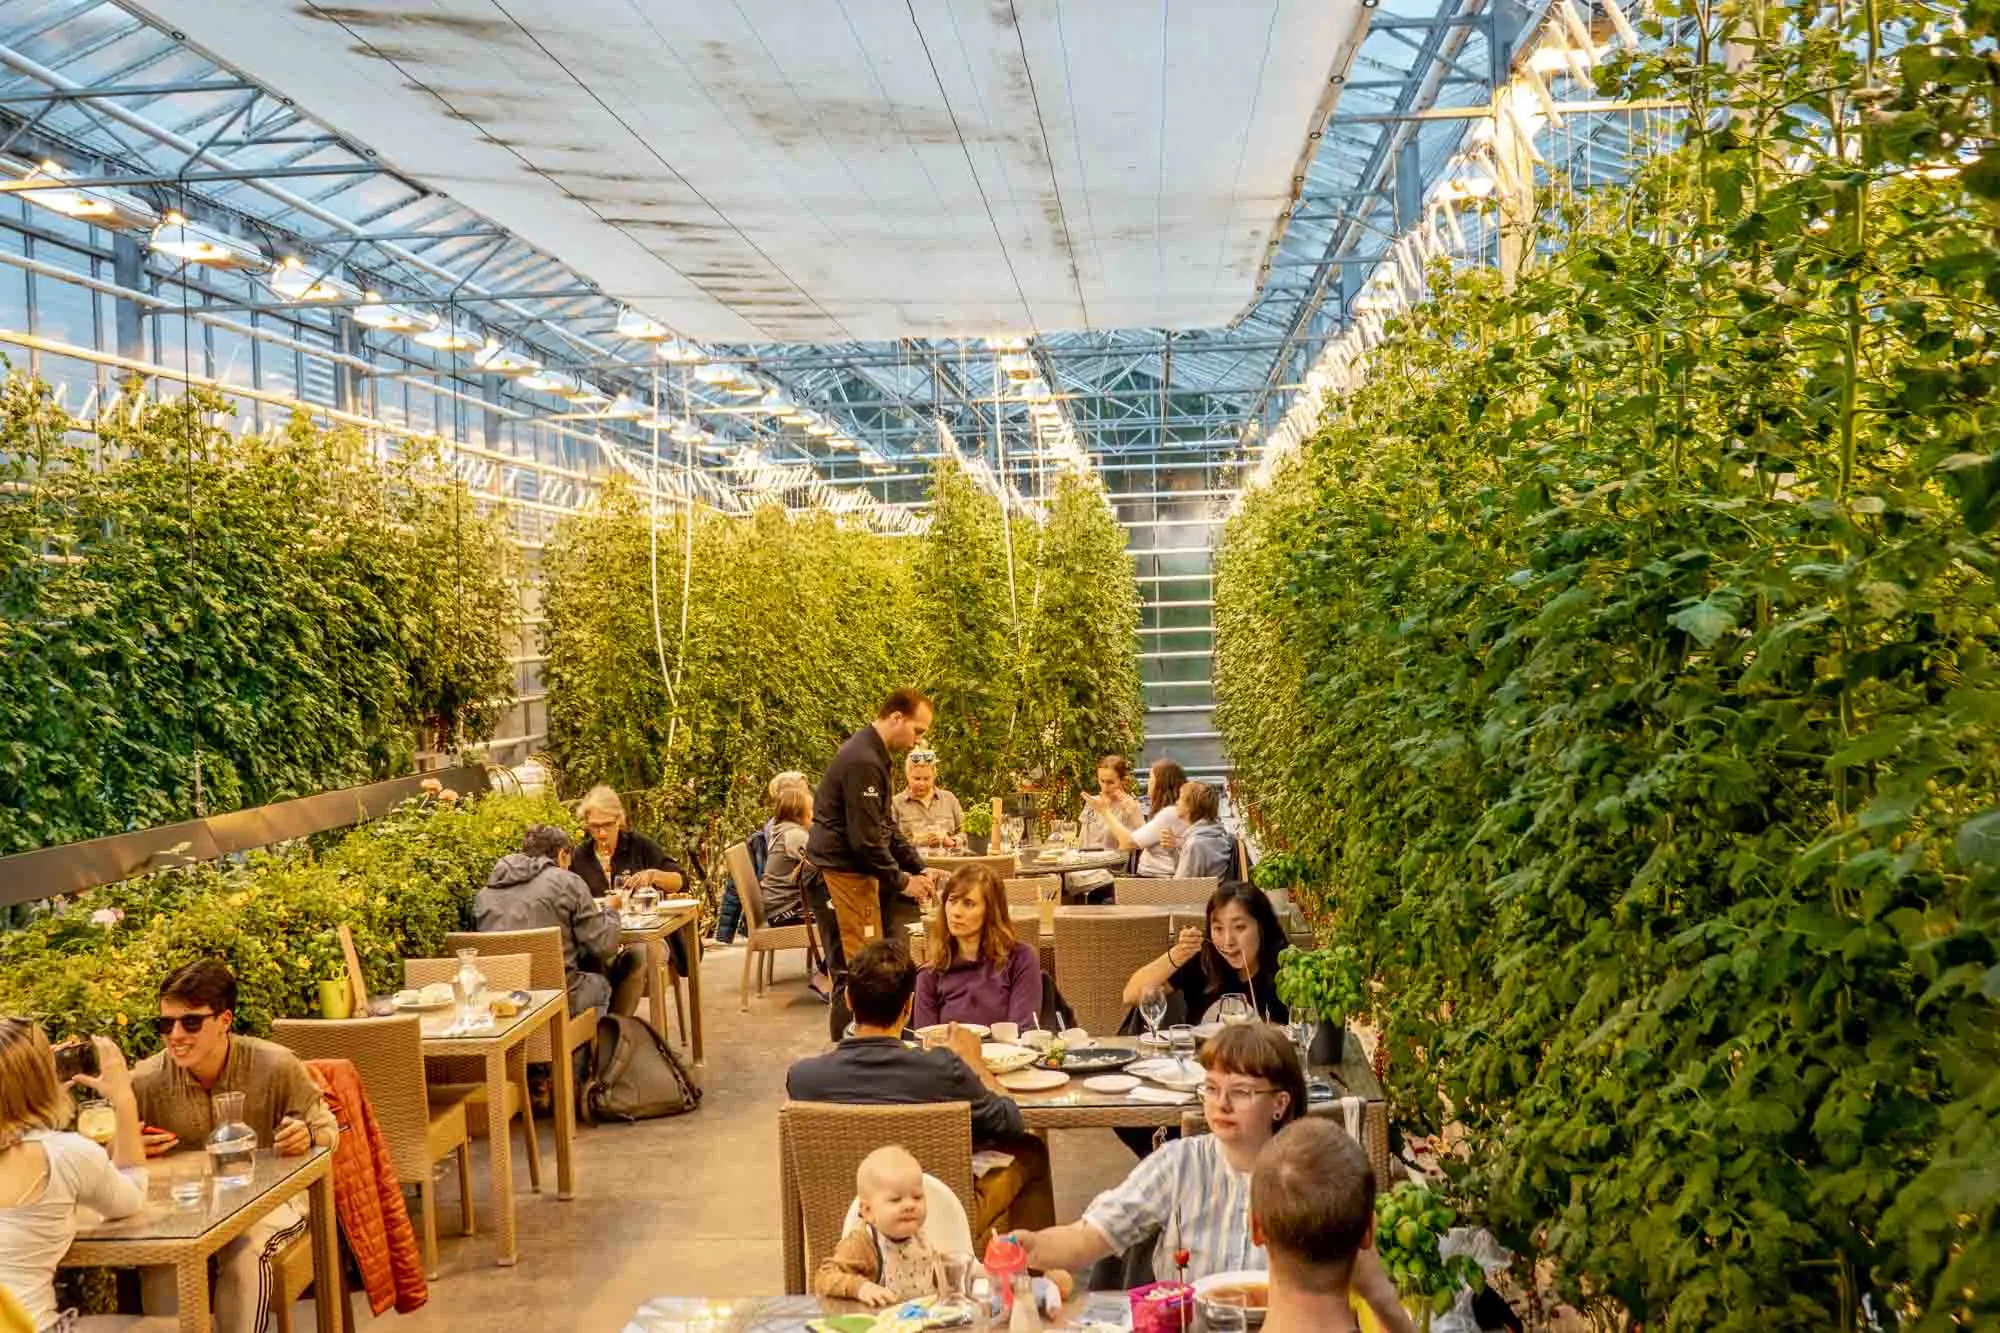 People eating inside the greenhouse at Fridheimar and enjoying the tomato delicacies